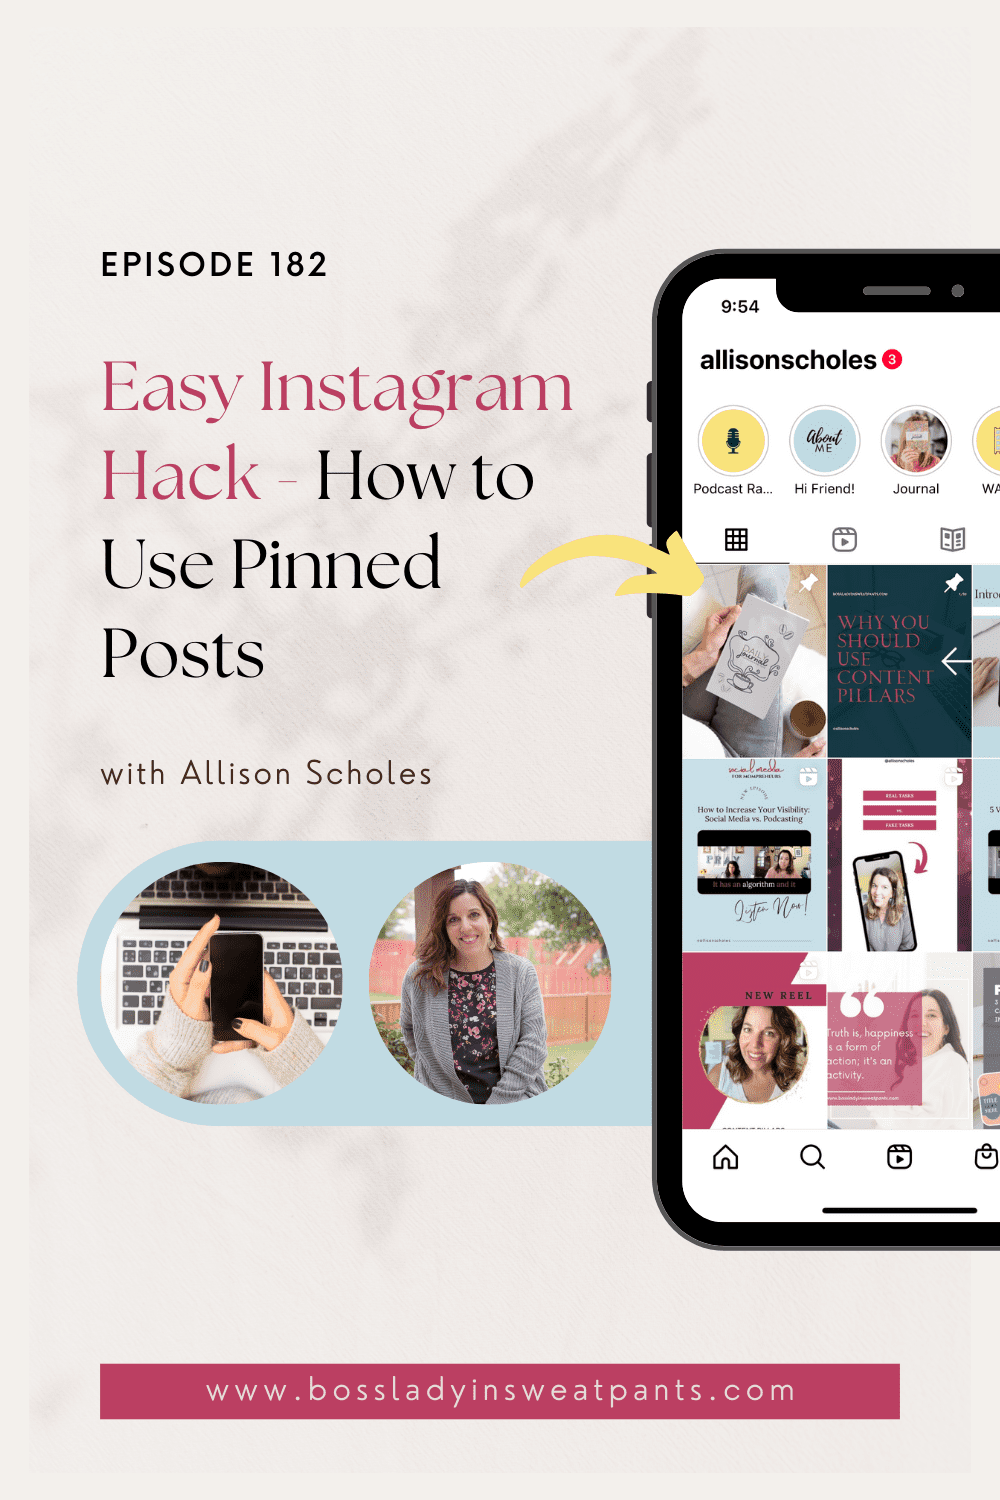 graphic with cell phone and photo of woman; easy Instagram hack - how to use pinned posts